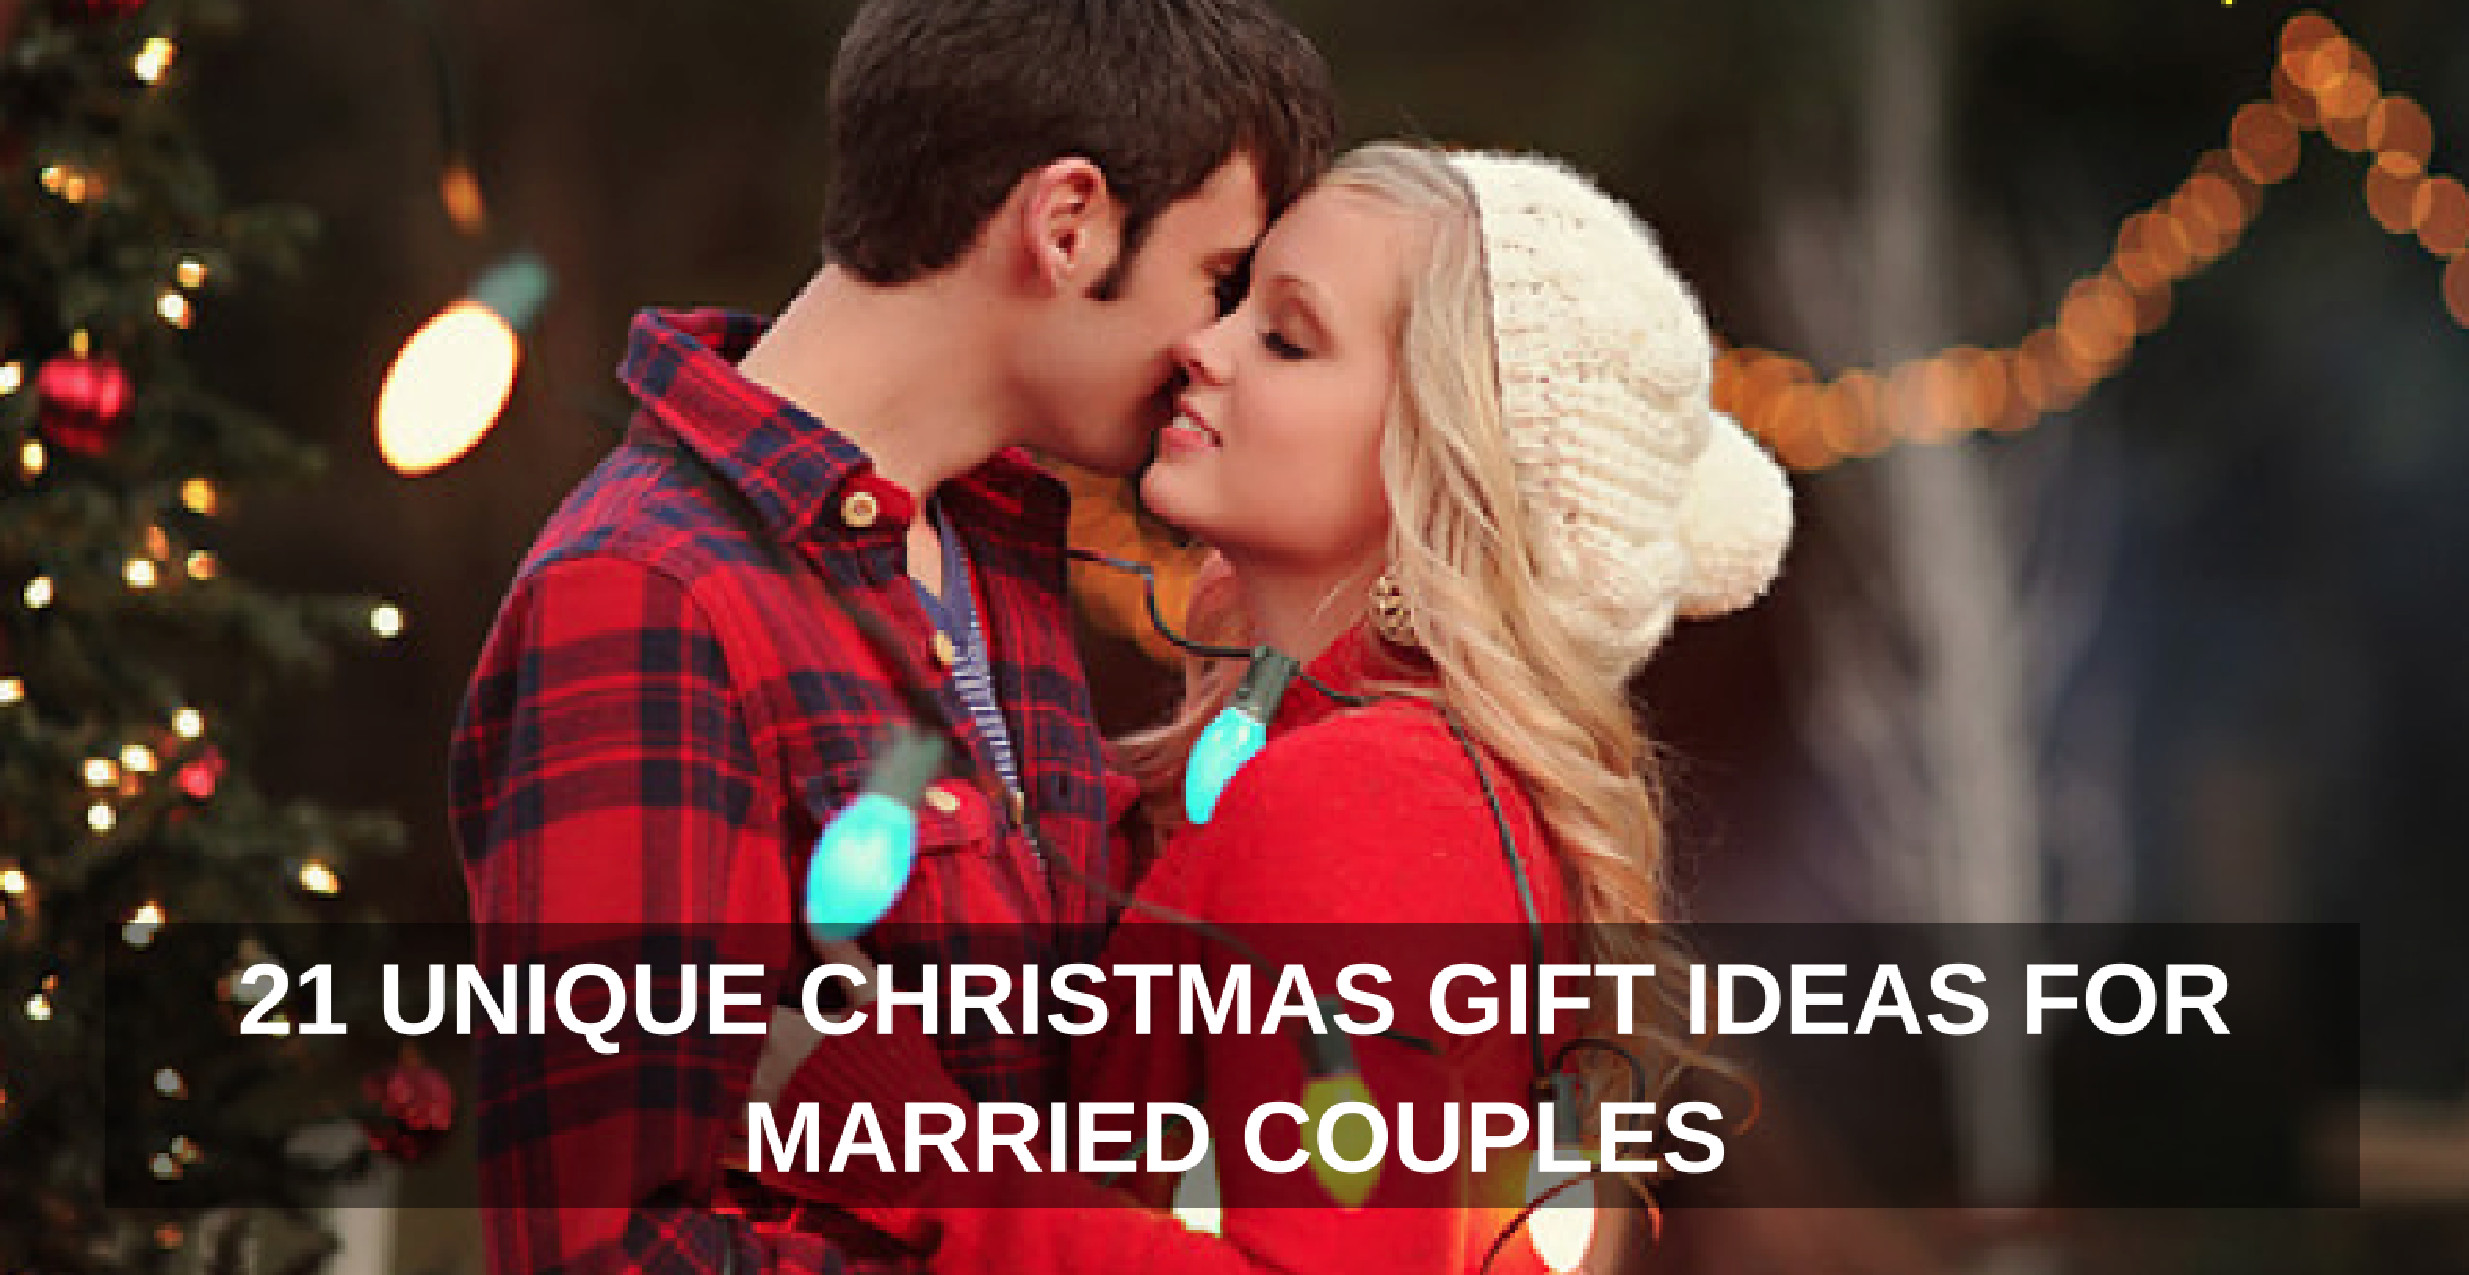 Christmas Gift Ideas For Engaged Couples
 21 Unique Christmas Gift Ideas for Married Couples